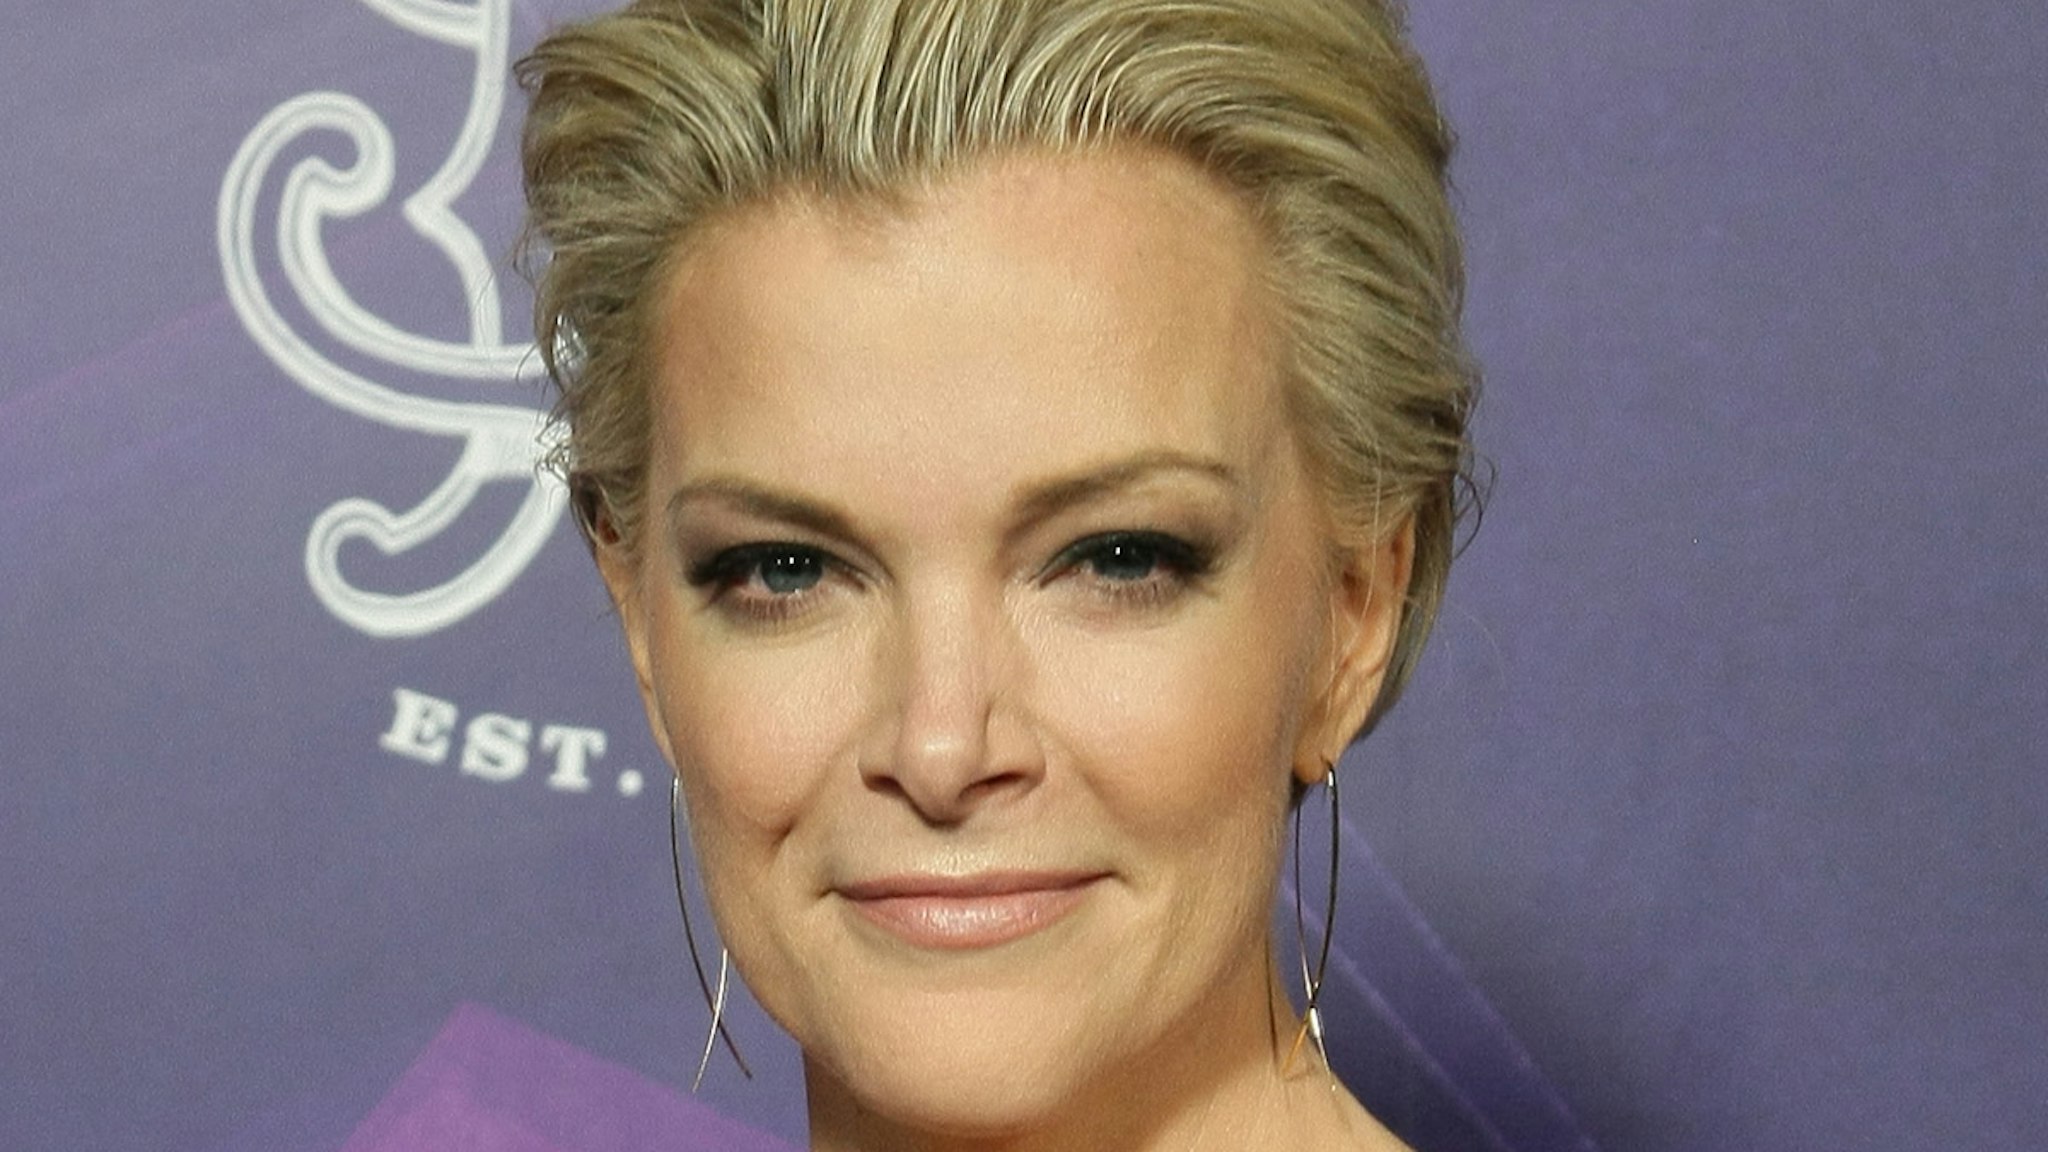 Megyn Kelly poses for photos on the red carpet during the Childhelp's 15th annual Drive The Dream Gala at The Phoenician Resort on February 02, 2019 in Scottsdale, Arizona.